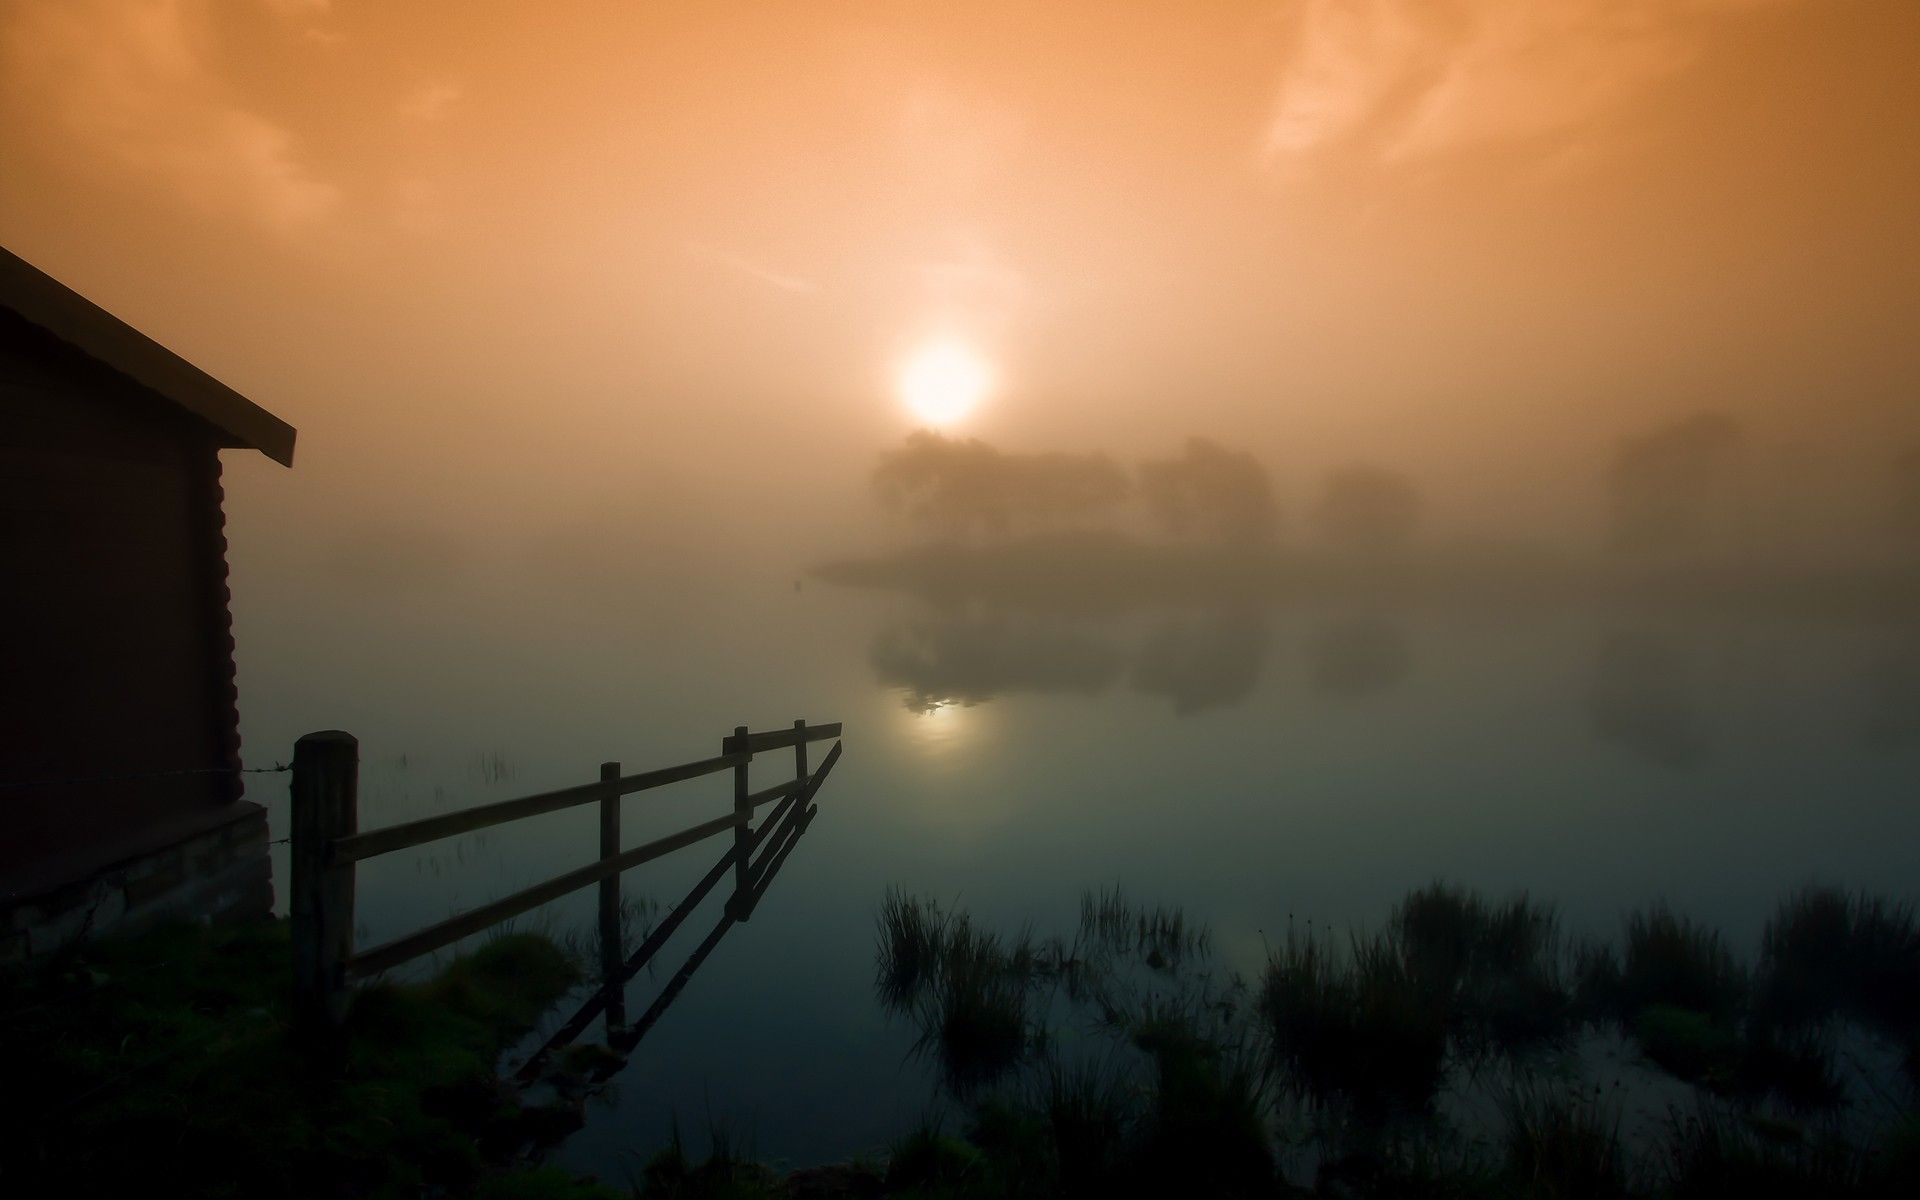 Daily Wallpaper: Foggy Morning. I Like To Waste My Time